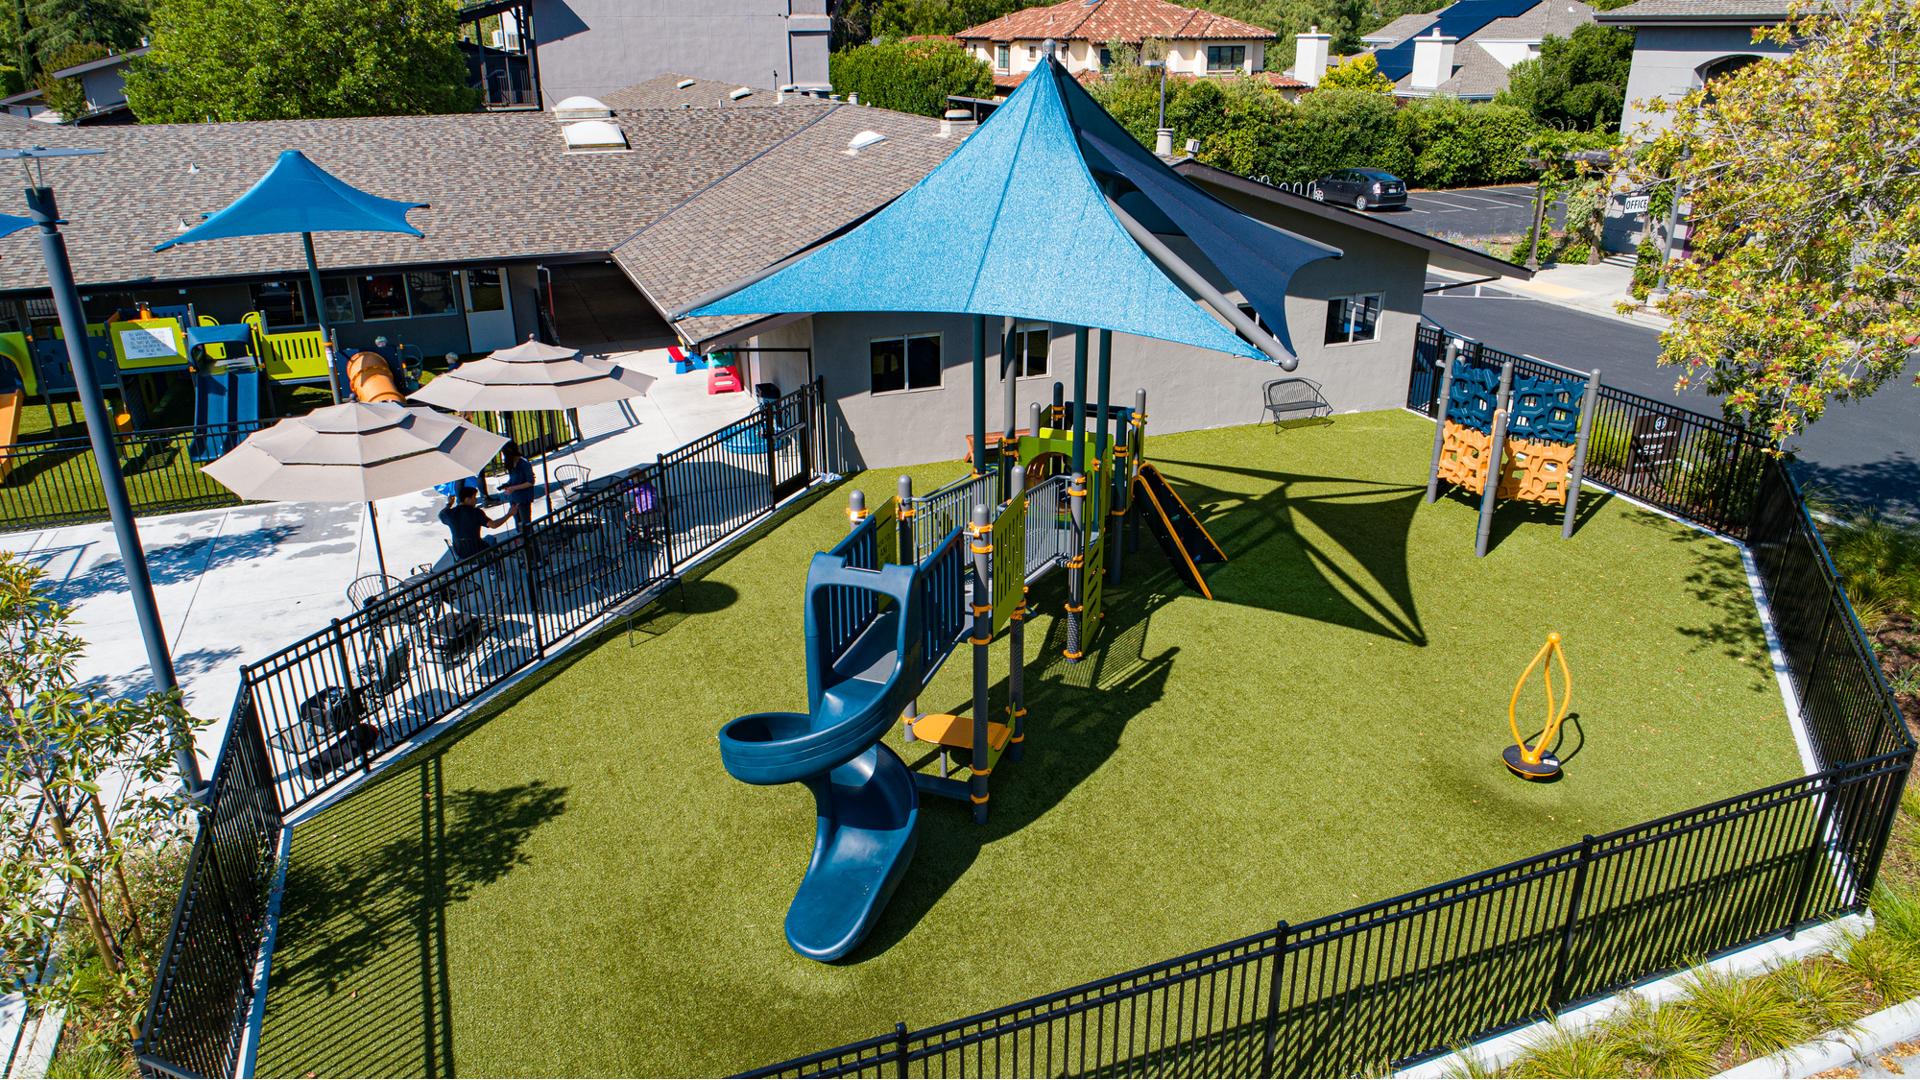 Elevated view of a fenced in play area with play structure and large blue overhead shade incorporated next to a church building with a secondary fenced off play area for younger children.